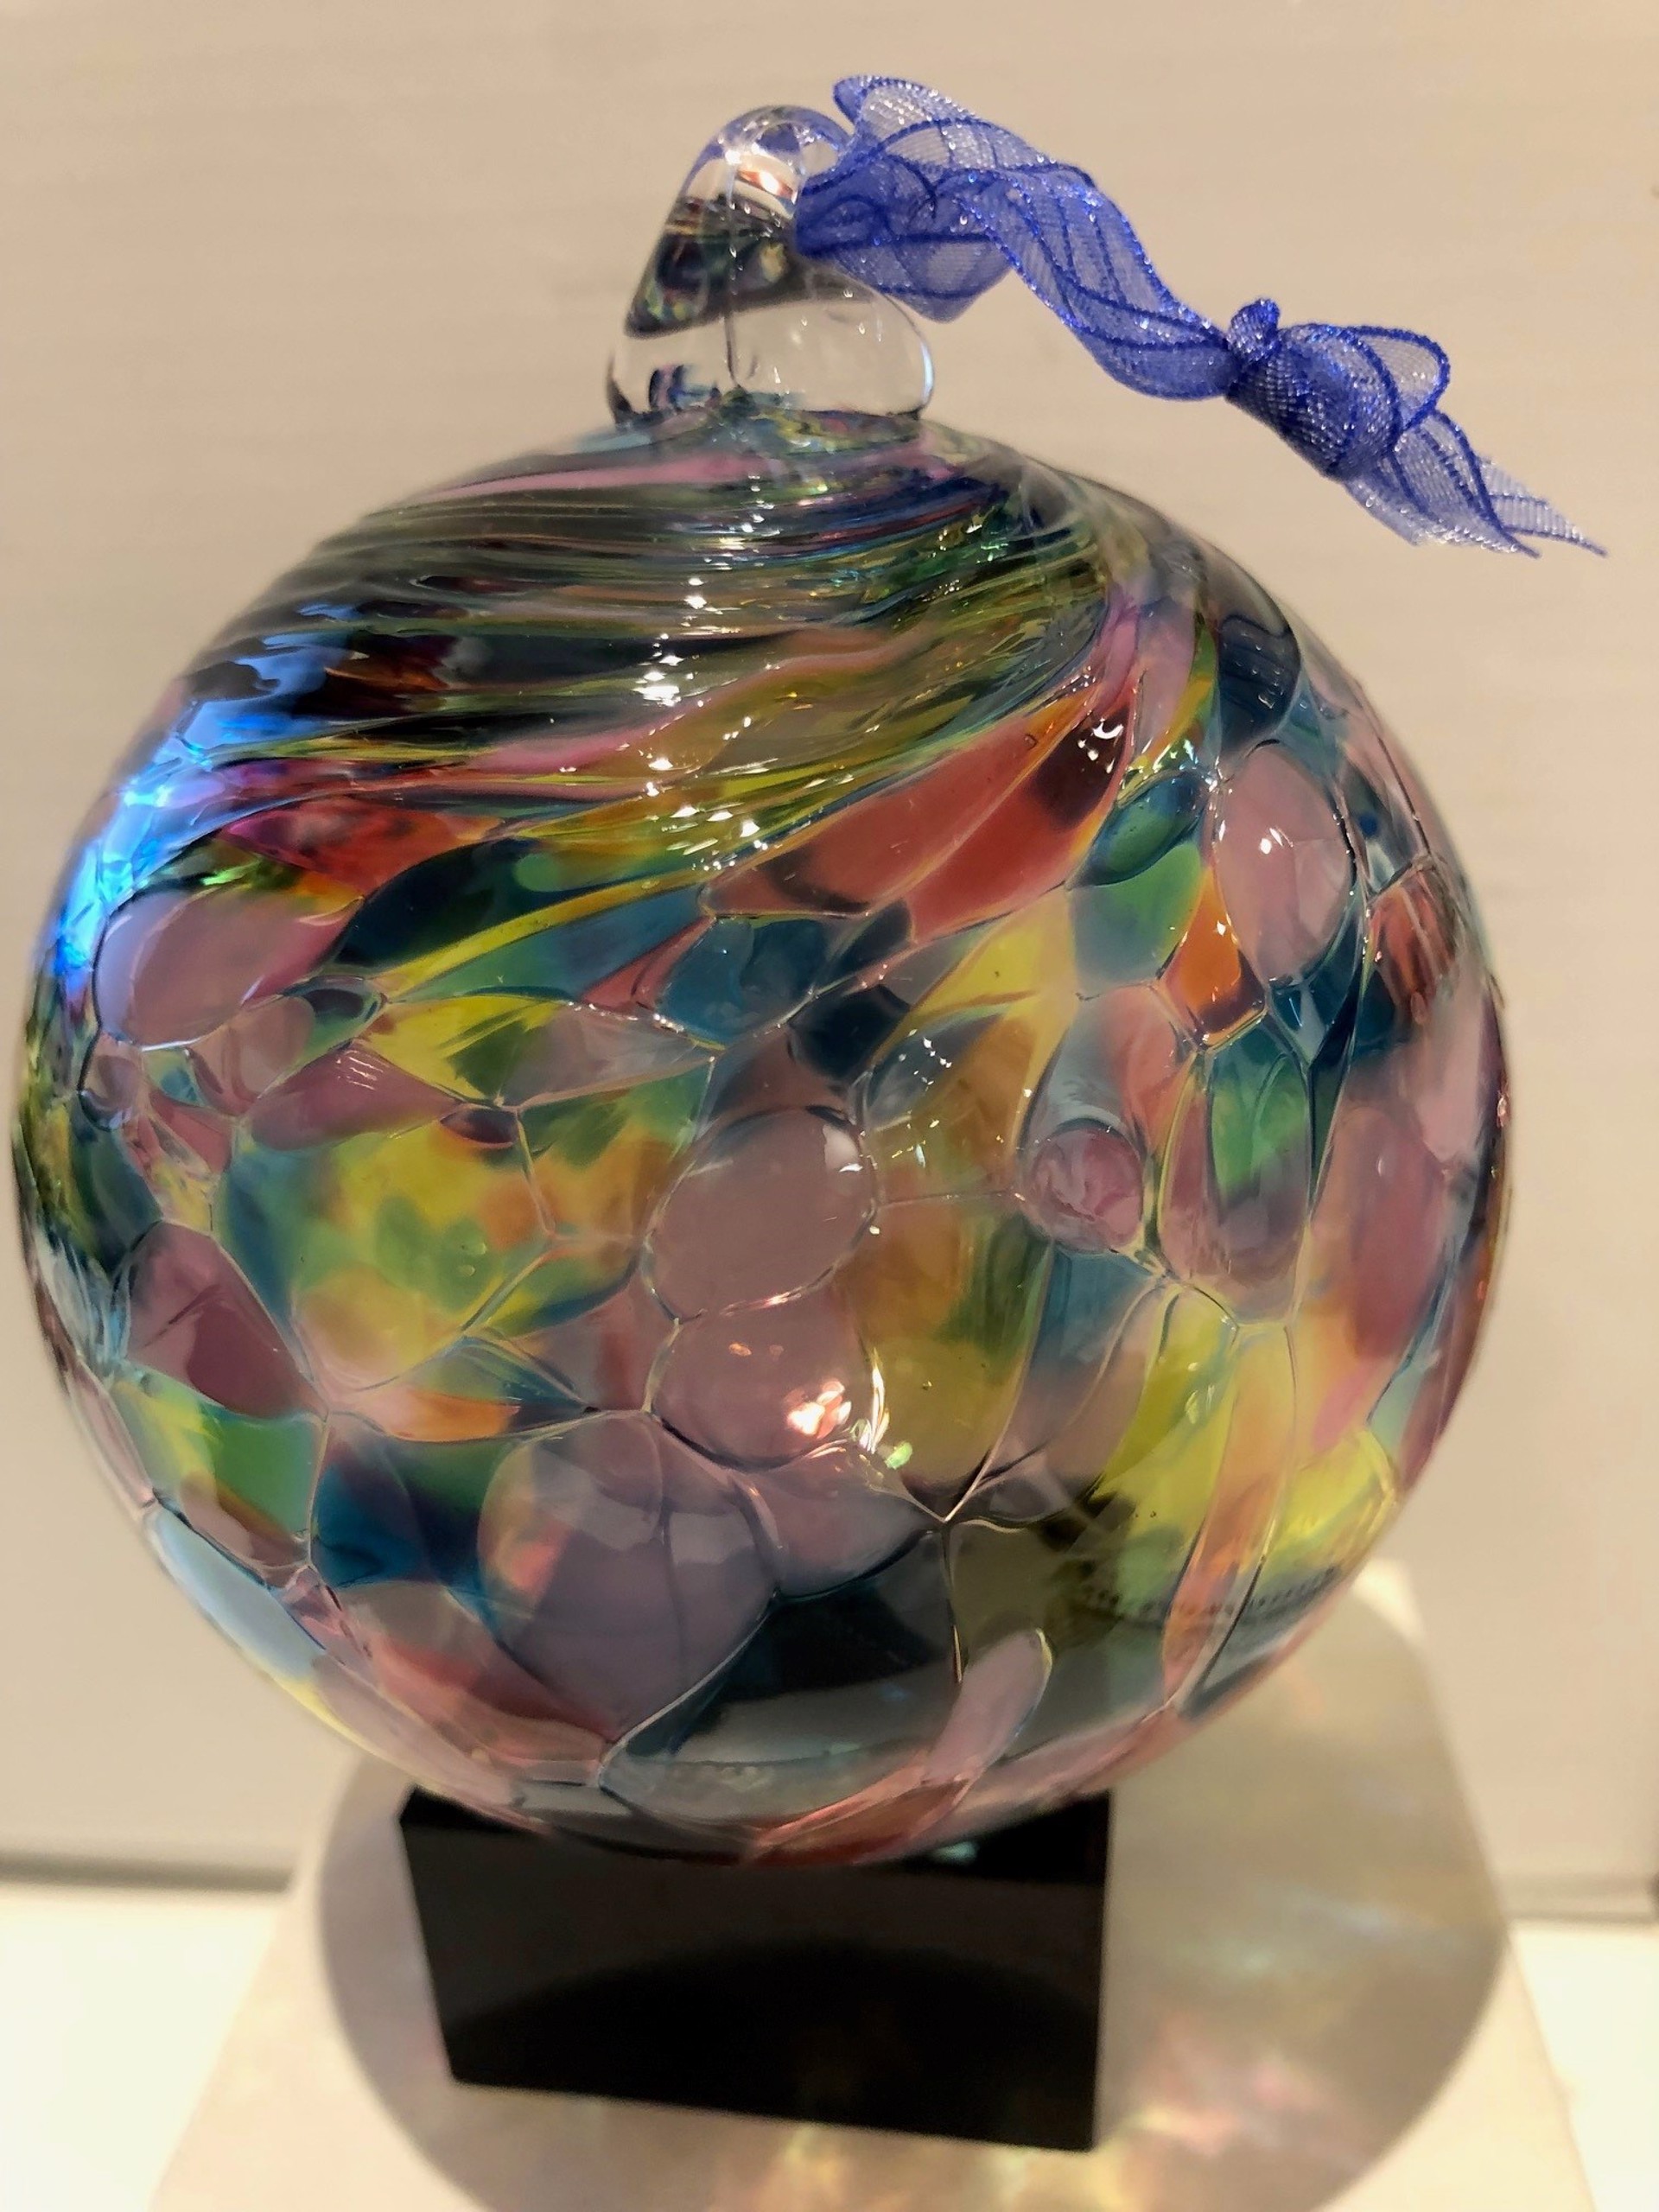 Swirled Speckled Friendship Ball - 203045 by Virginia Wilson Toccalino